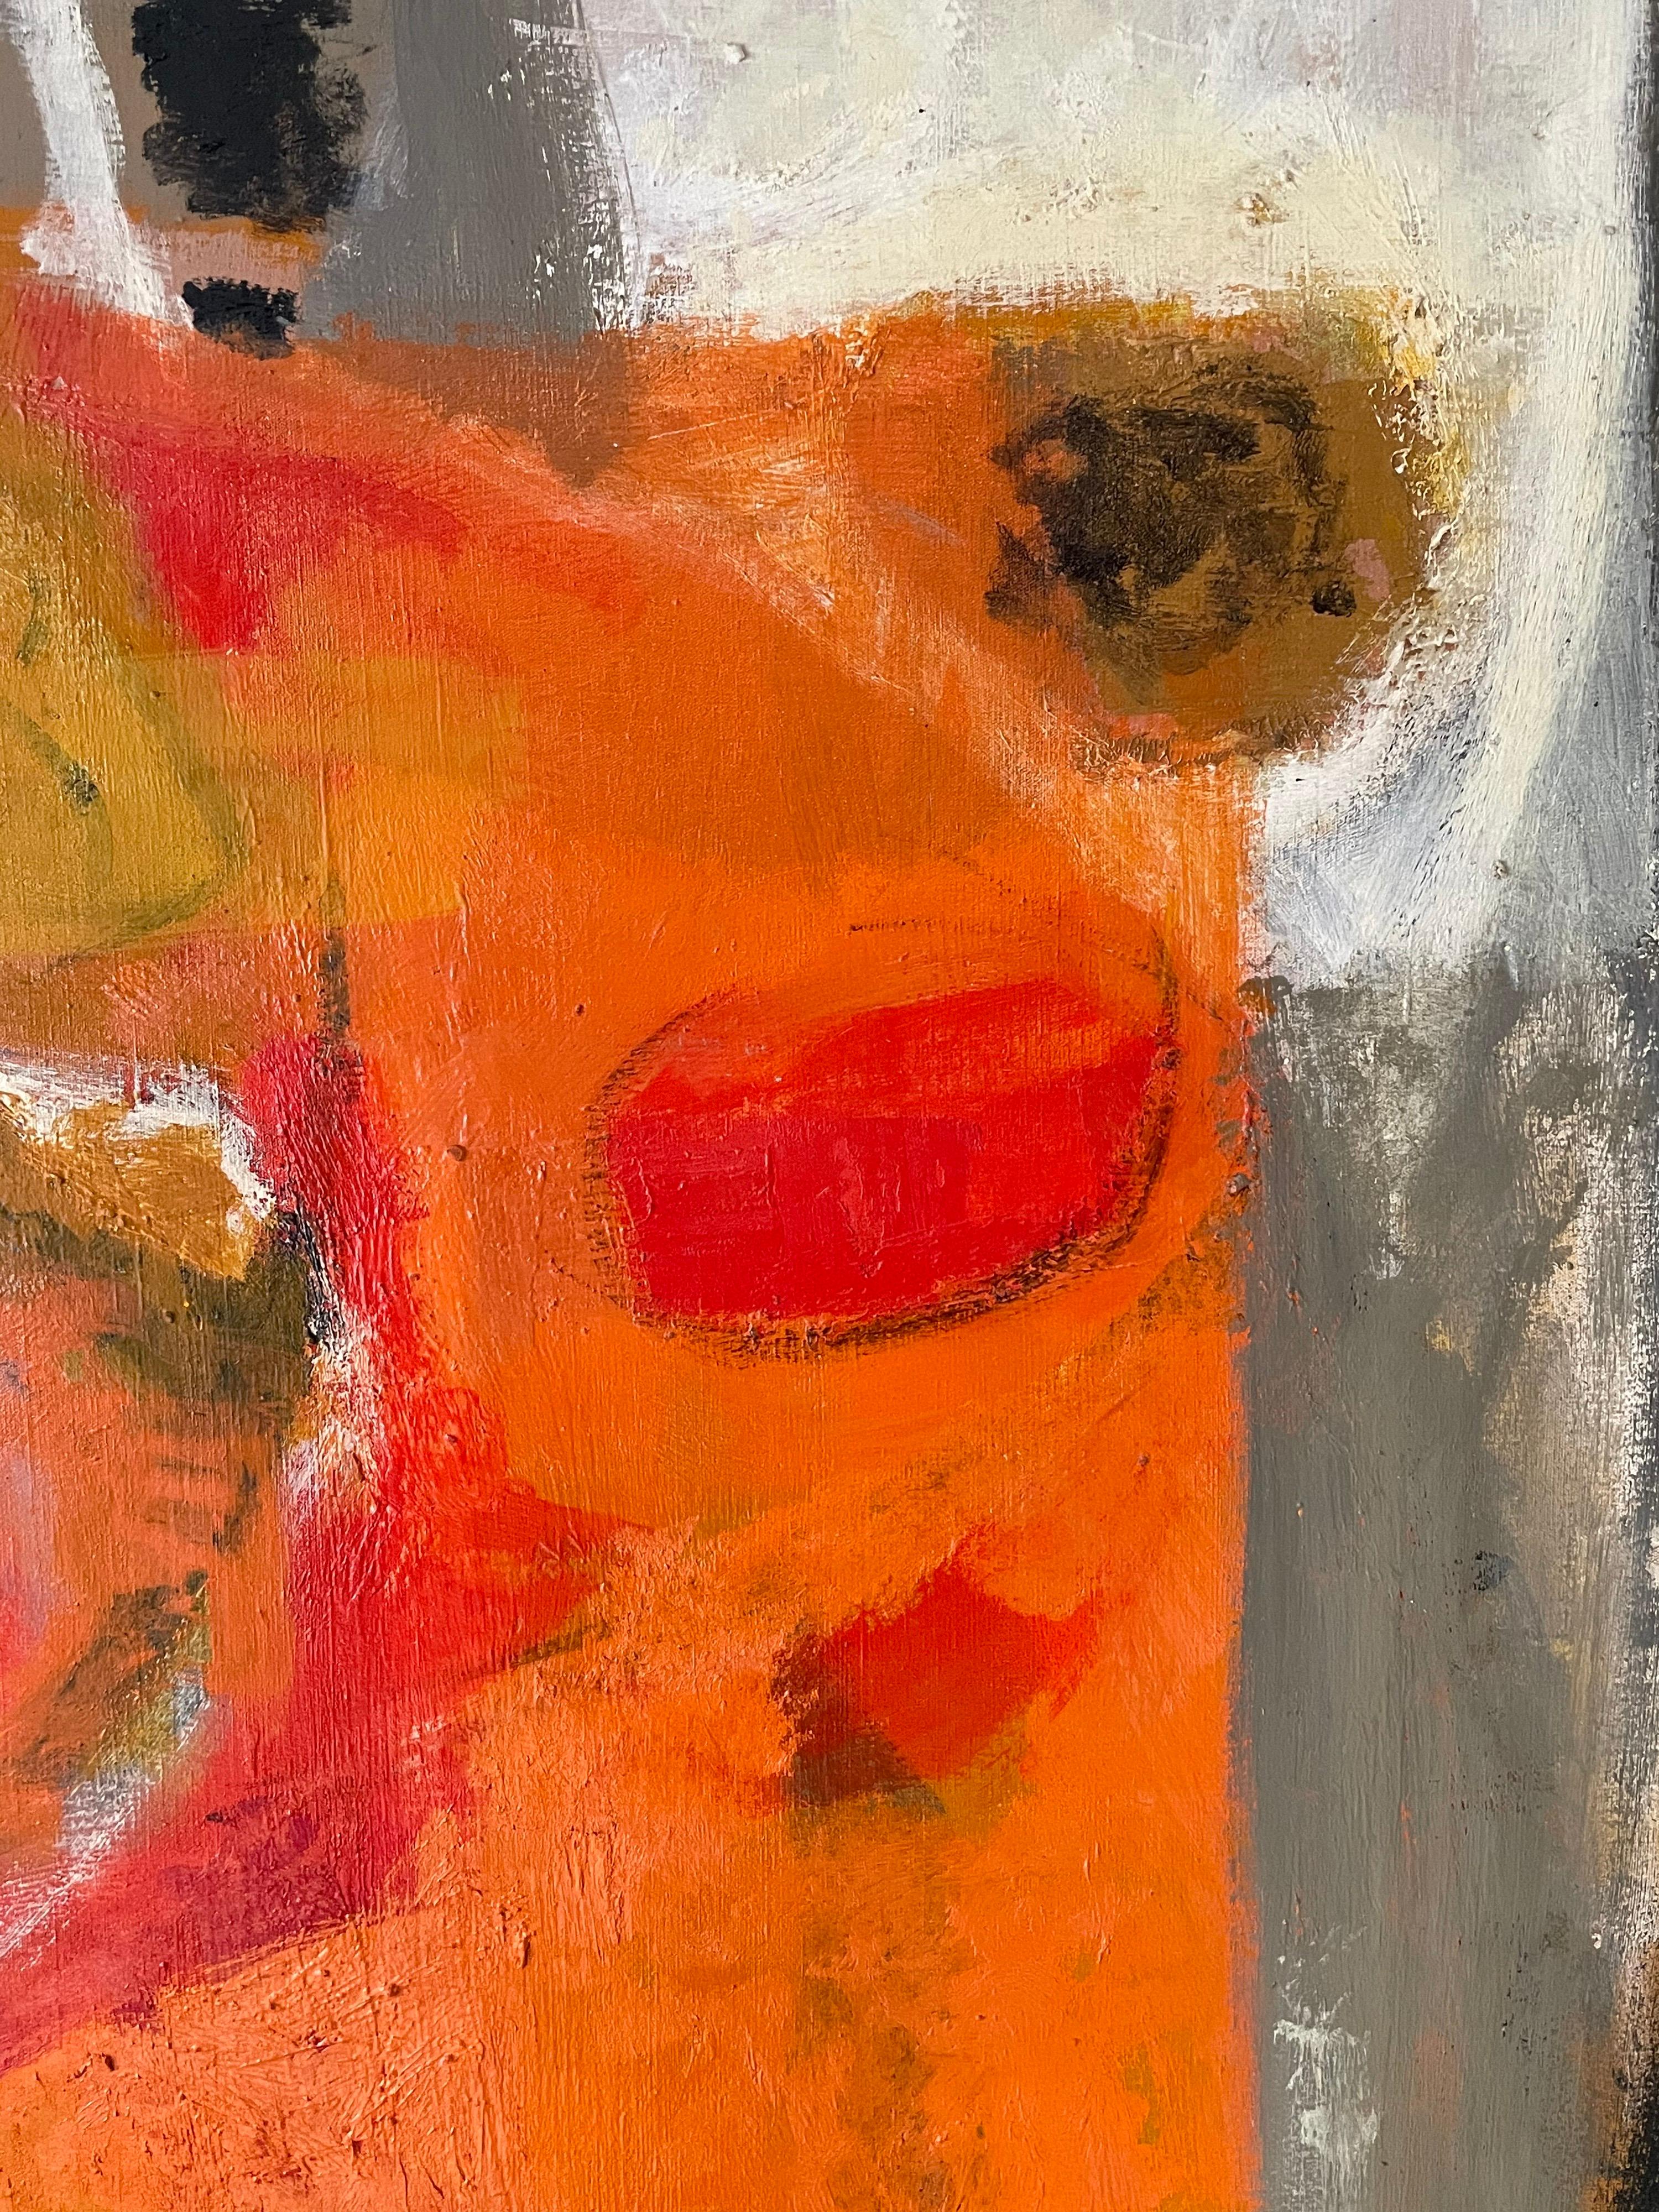 Huge Mid 20th Century French Abstract Expressionist Oil Painting Orange Reds 1